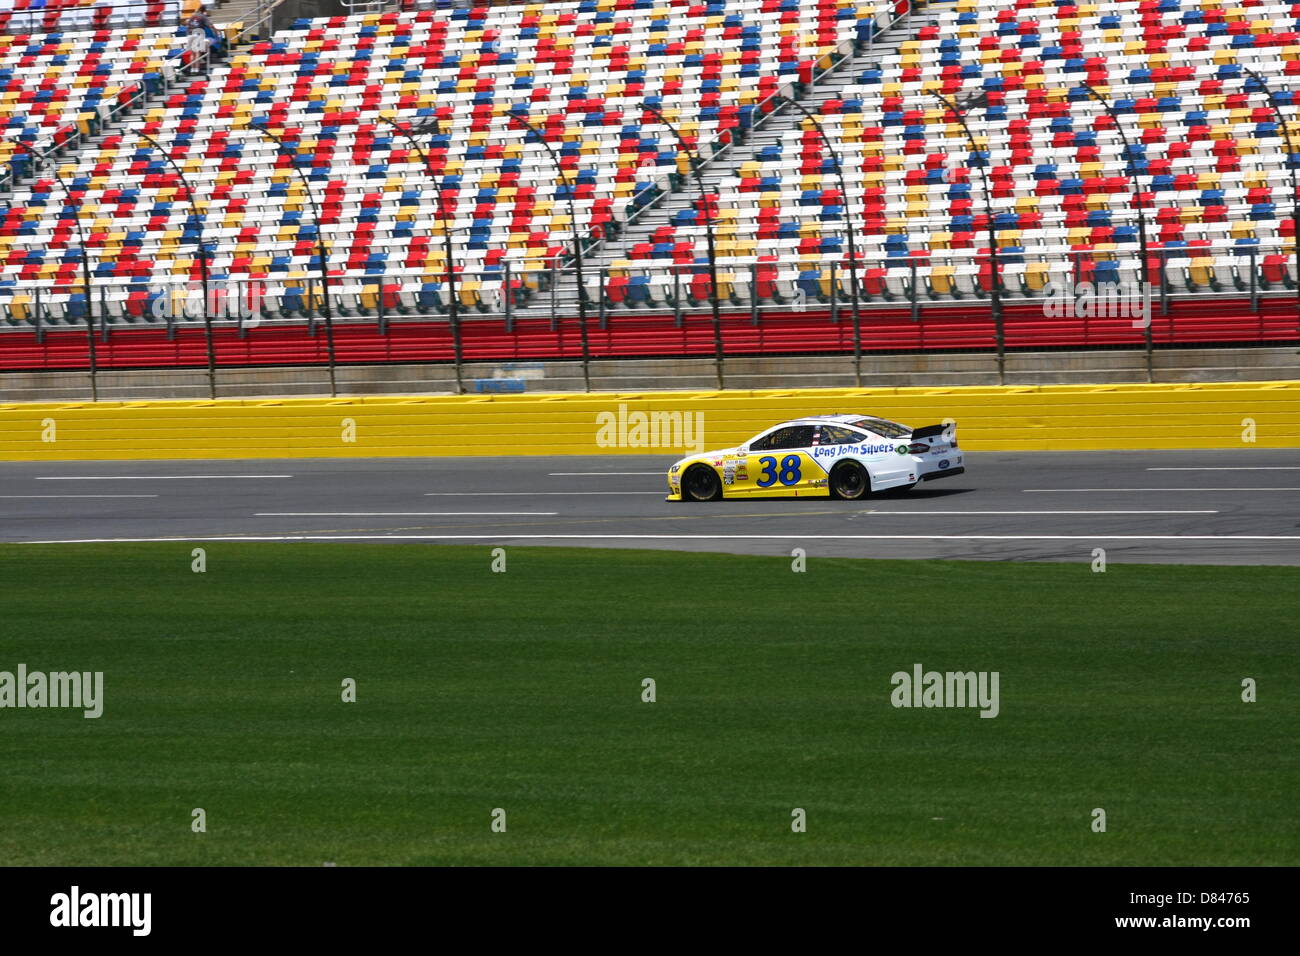 Charlotte, USA. 17th May, 2013. David Gilliland passes the grandstand during final practice for the Sprint Showdown at Charlotte Motor Speedway on May 17, 2013. Credit: Alamy Live News Stock Photo